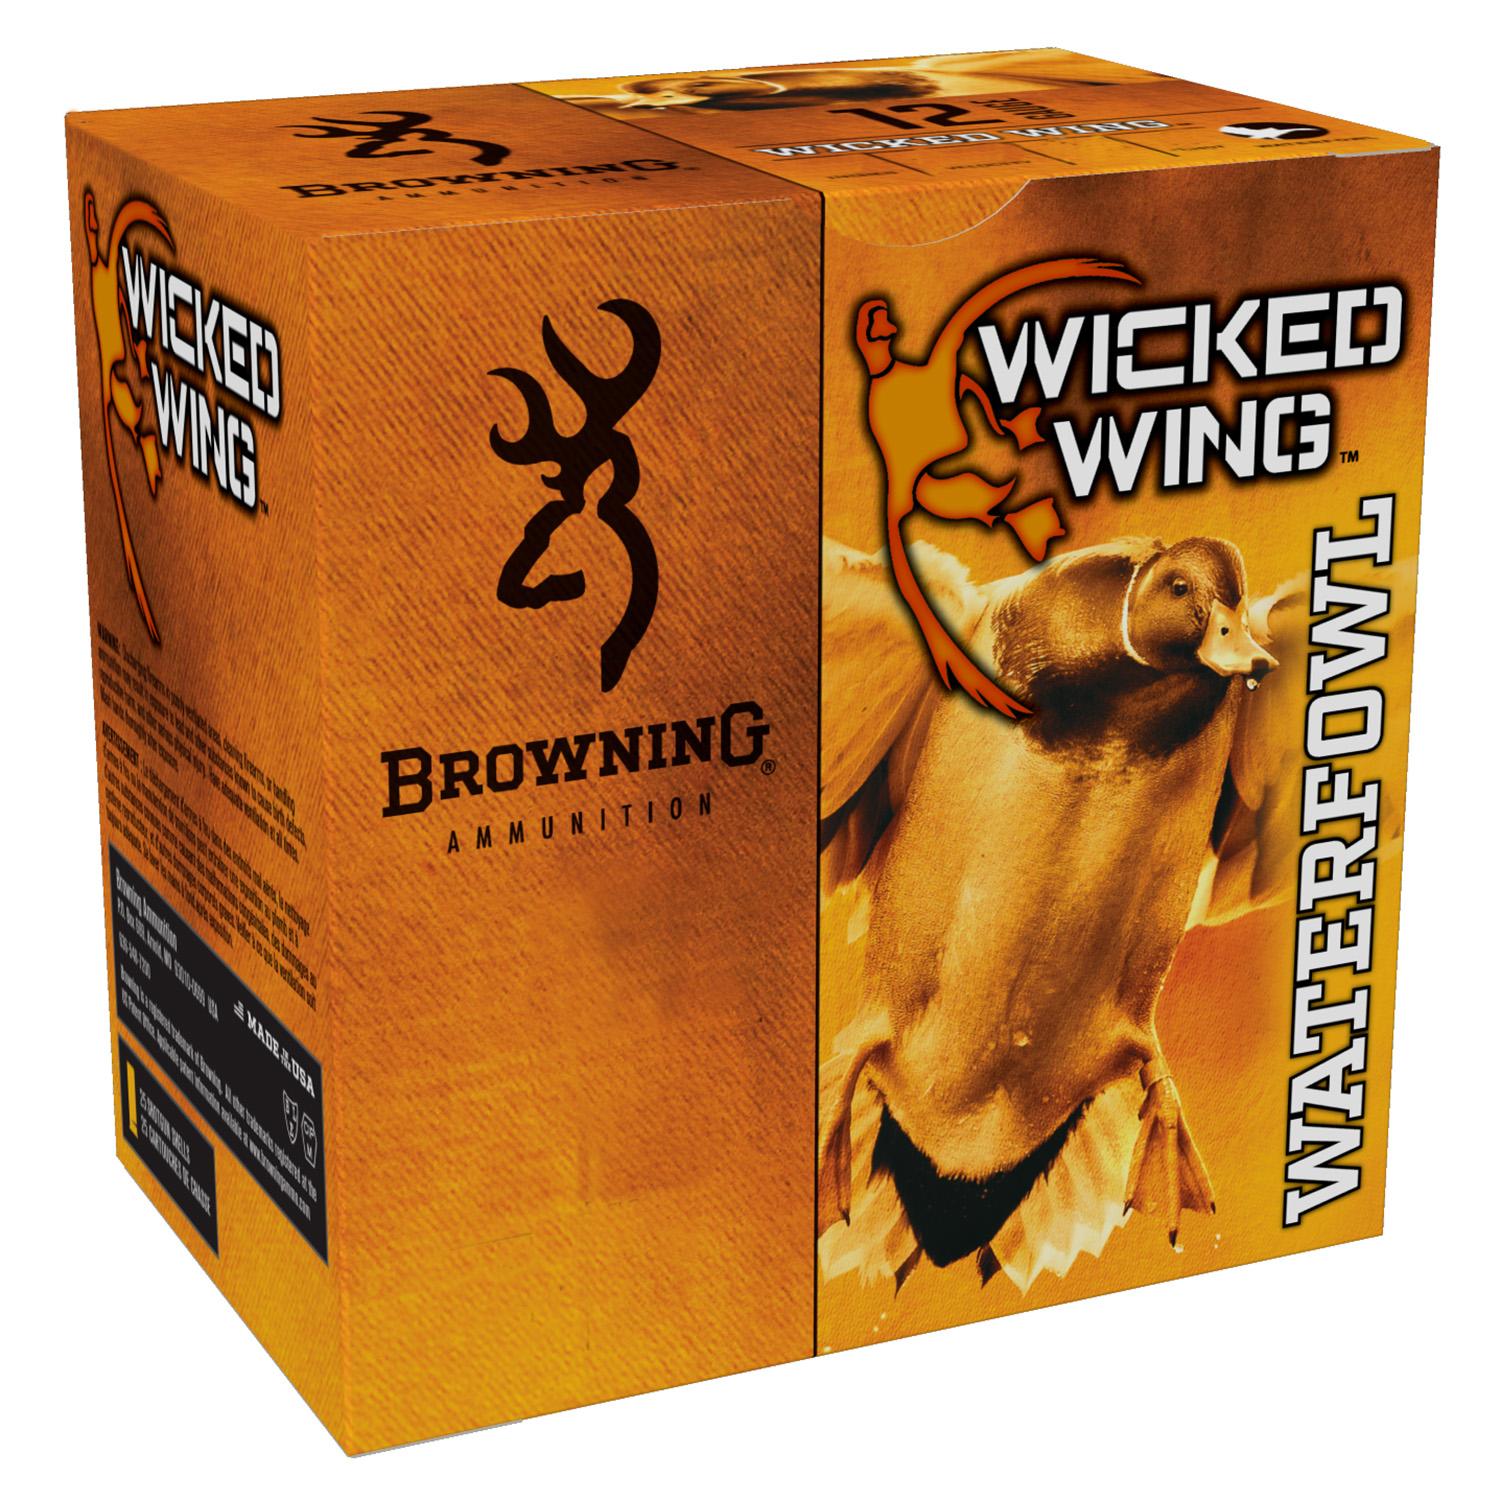  Browning Ammo B193411242 Wicked Wing Xd Extra Distance 12 Gauge 3.5 